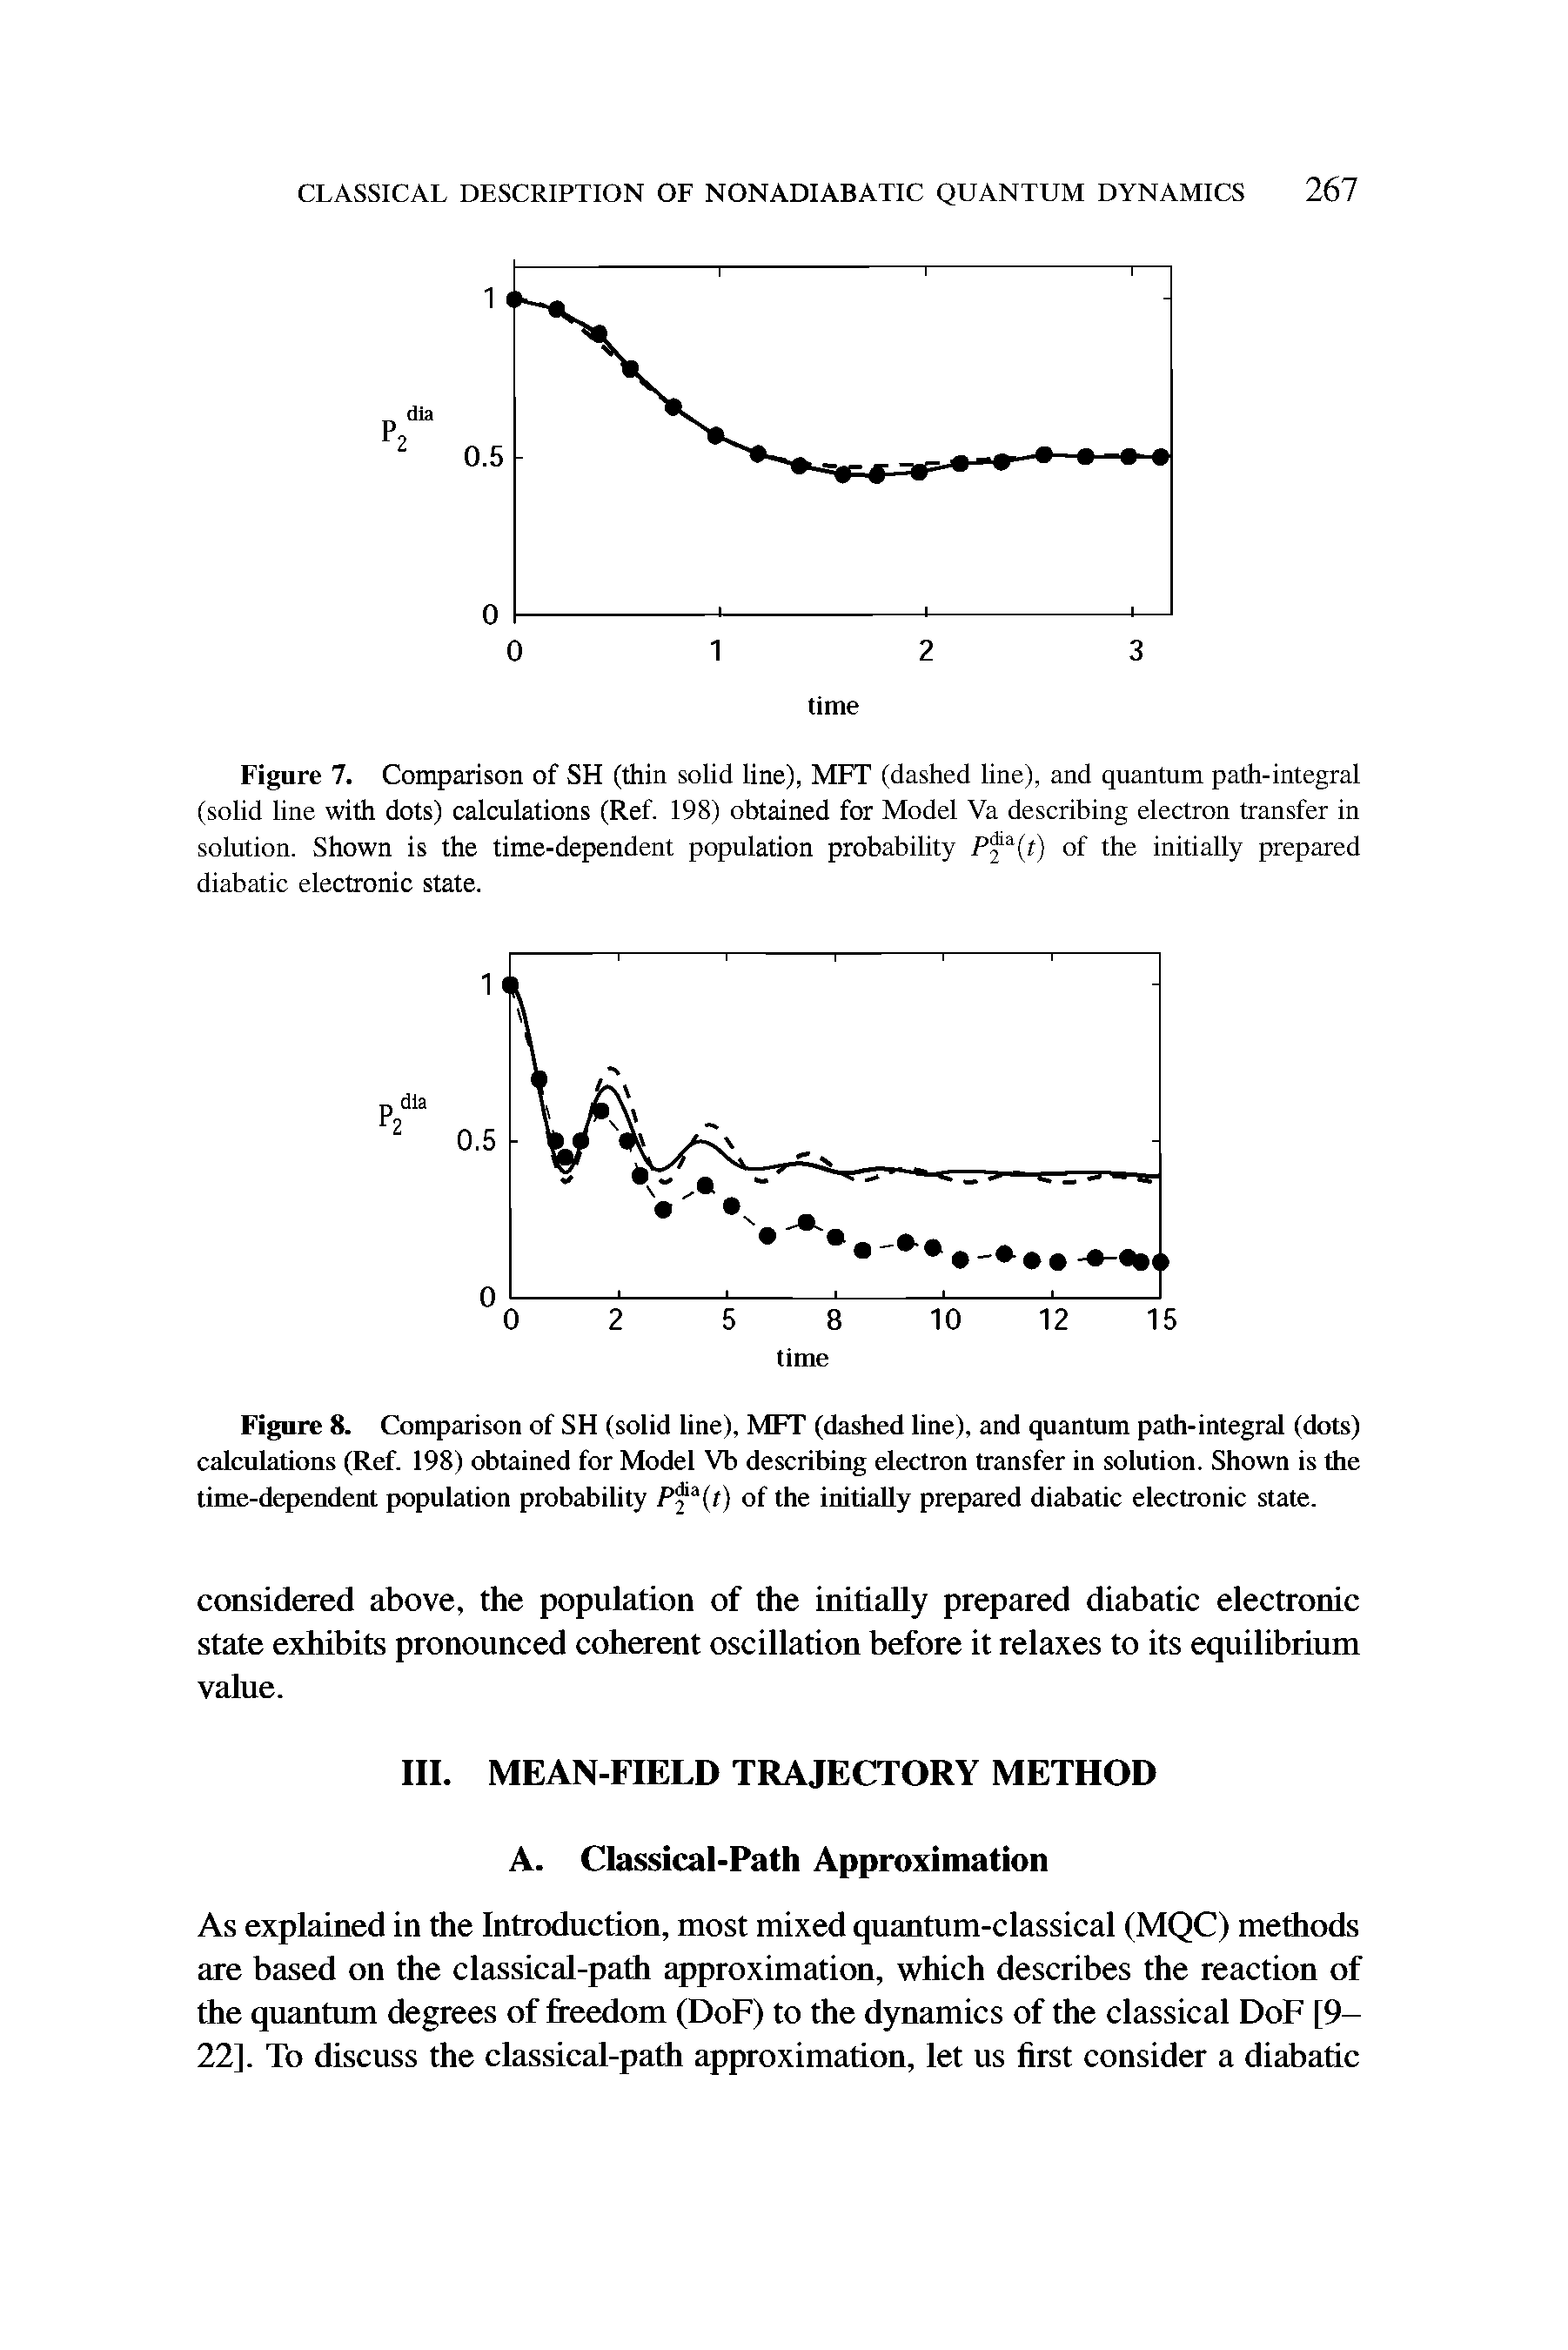 Figure 7. Comparison of SH (thin solid line), MFT (dashed line), and quantum path-integral (solid line with dots) calculations (Ref. 198) obtained for Model Va describing electron transfer in solution. Shown is the time-dependent population probability Pf t) of the initially prepared diabatic electronic state.